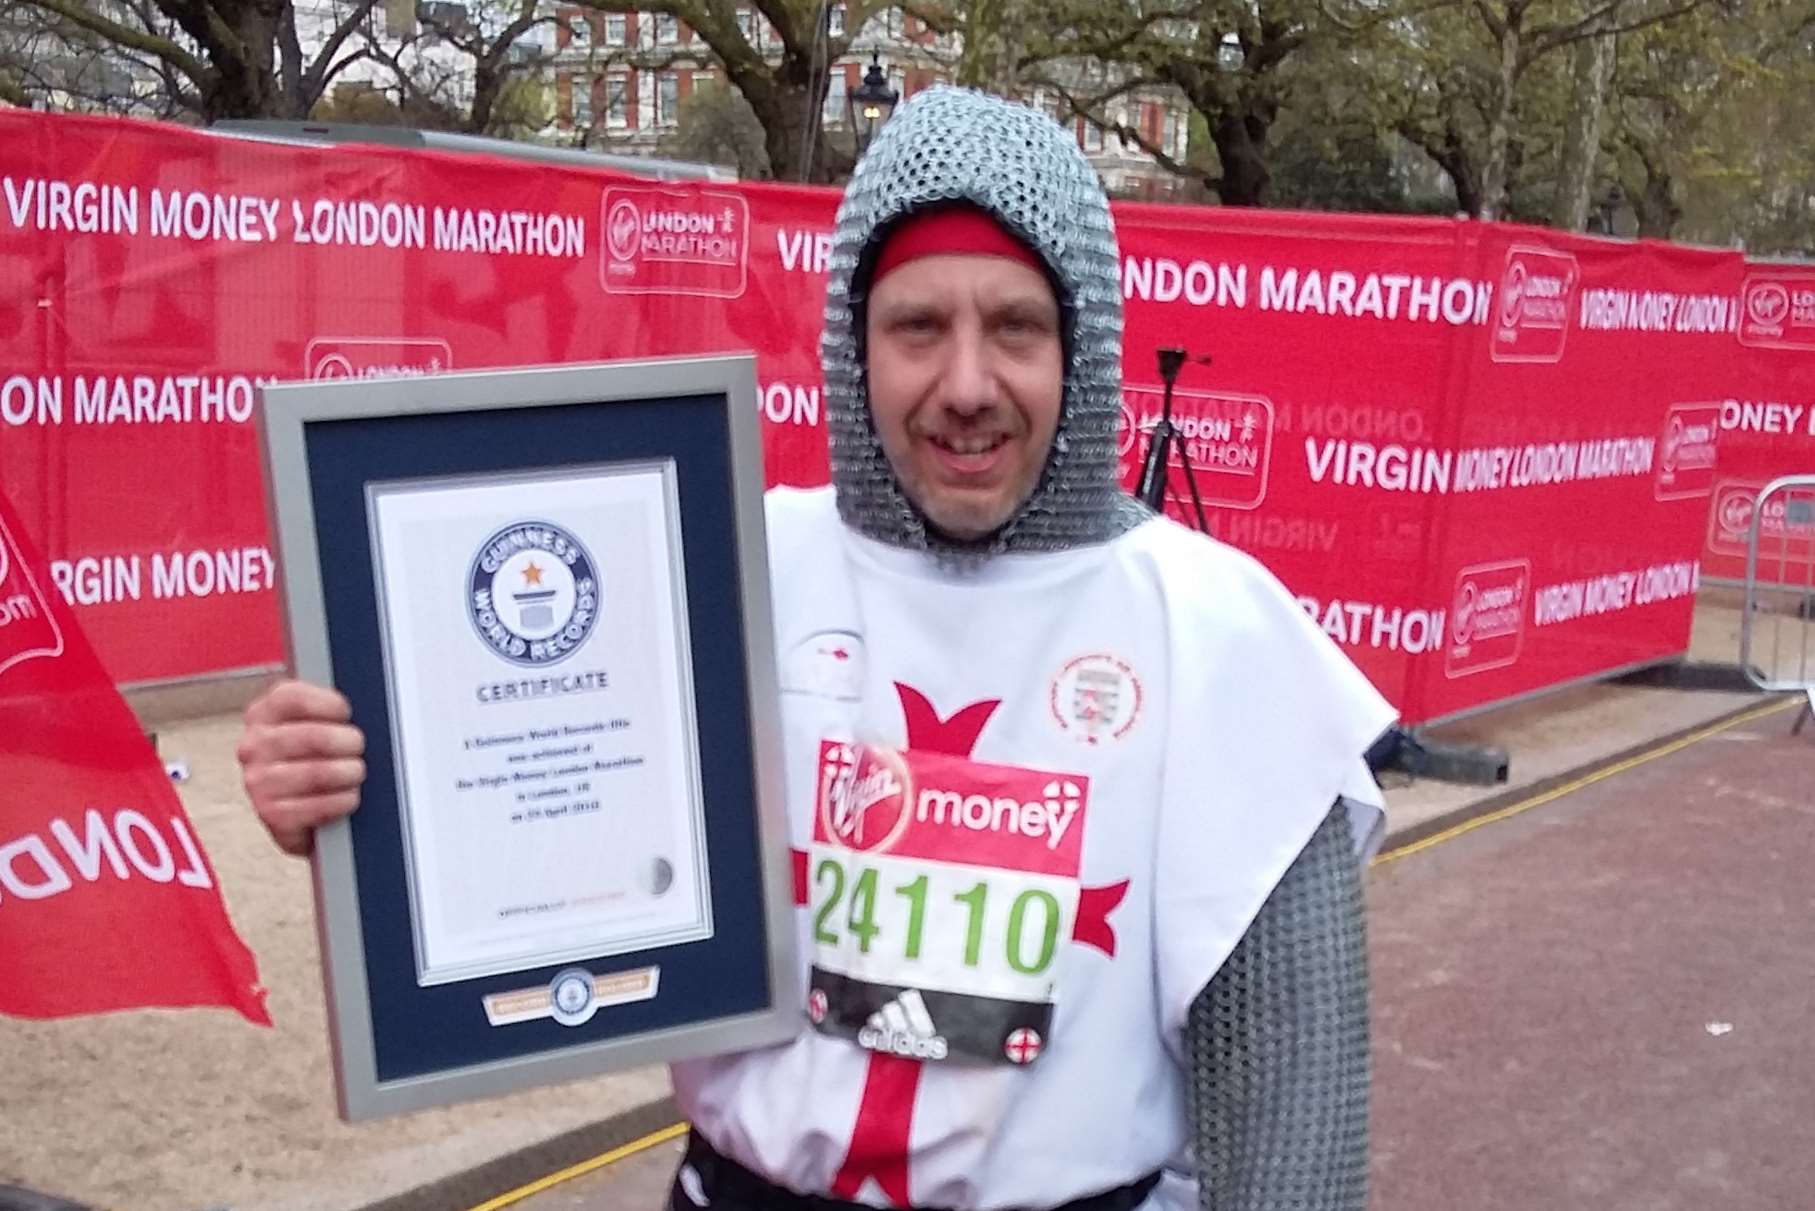 David Cooke, broke the Guinness World Record by running the London Marathon in chainmail